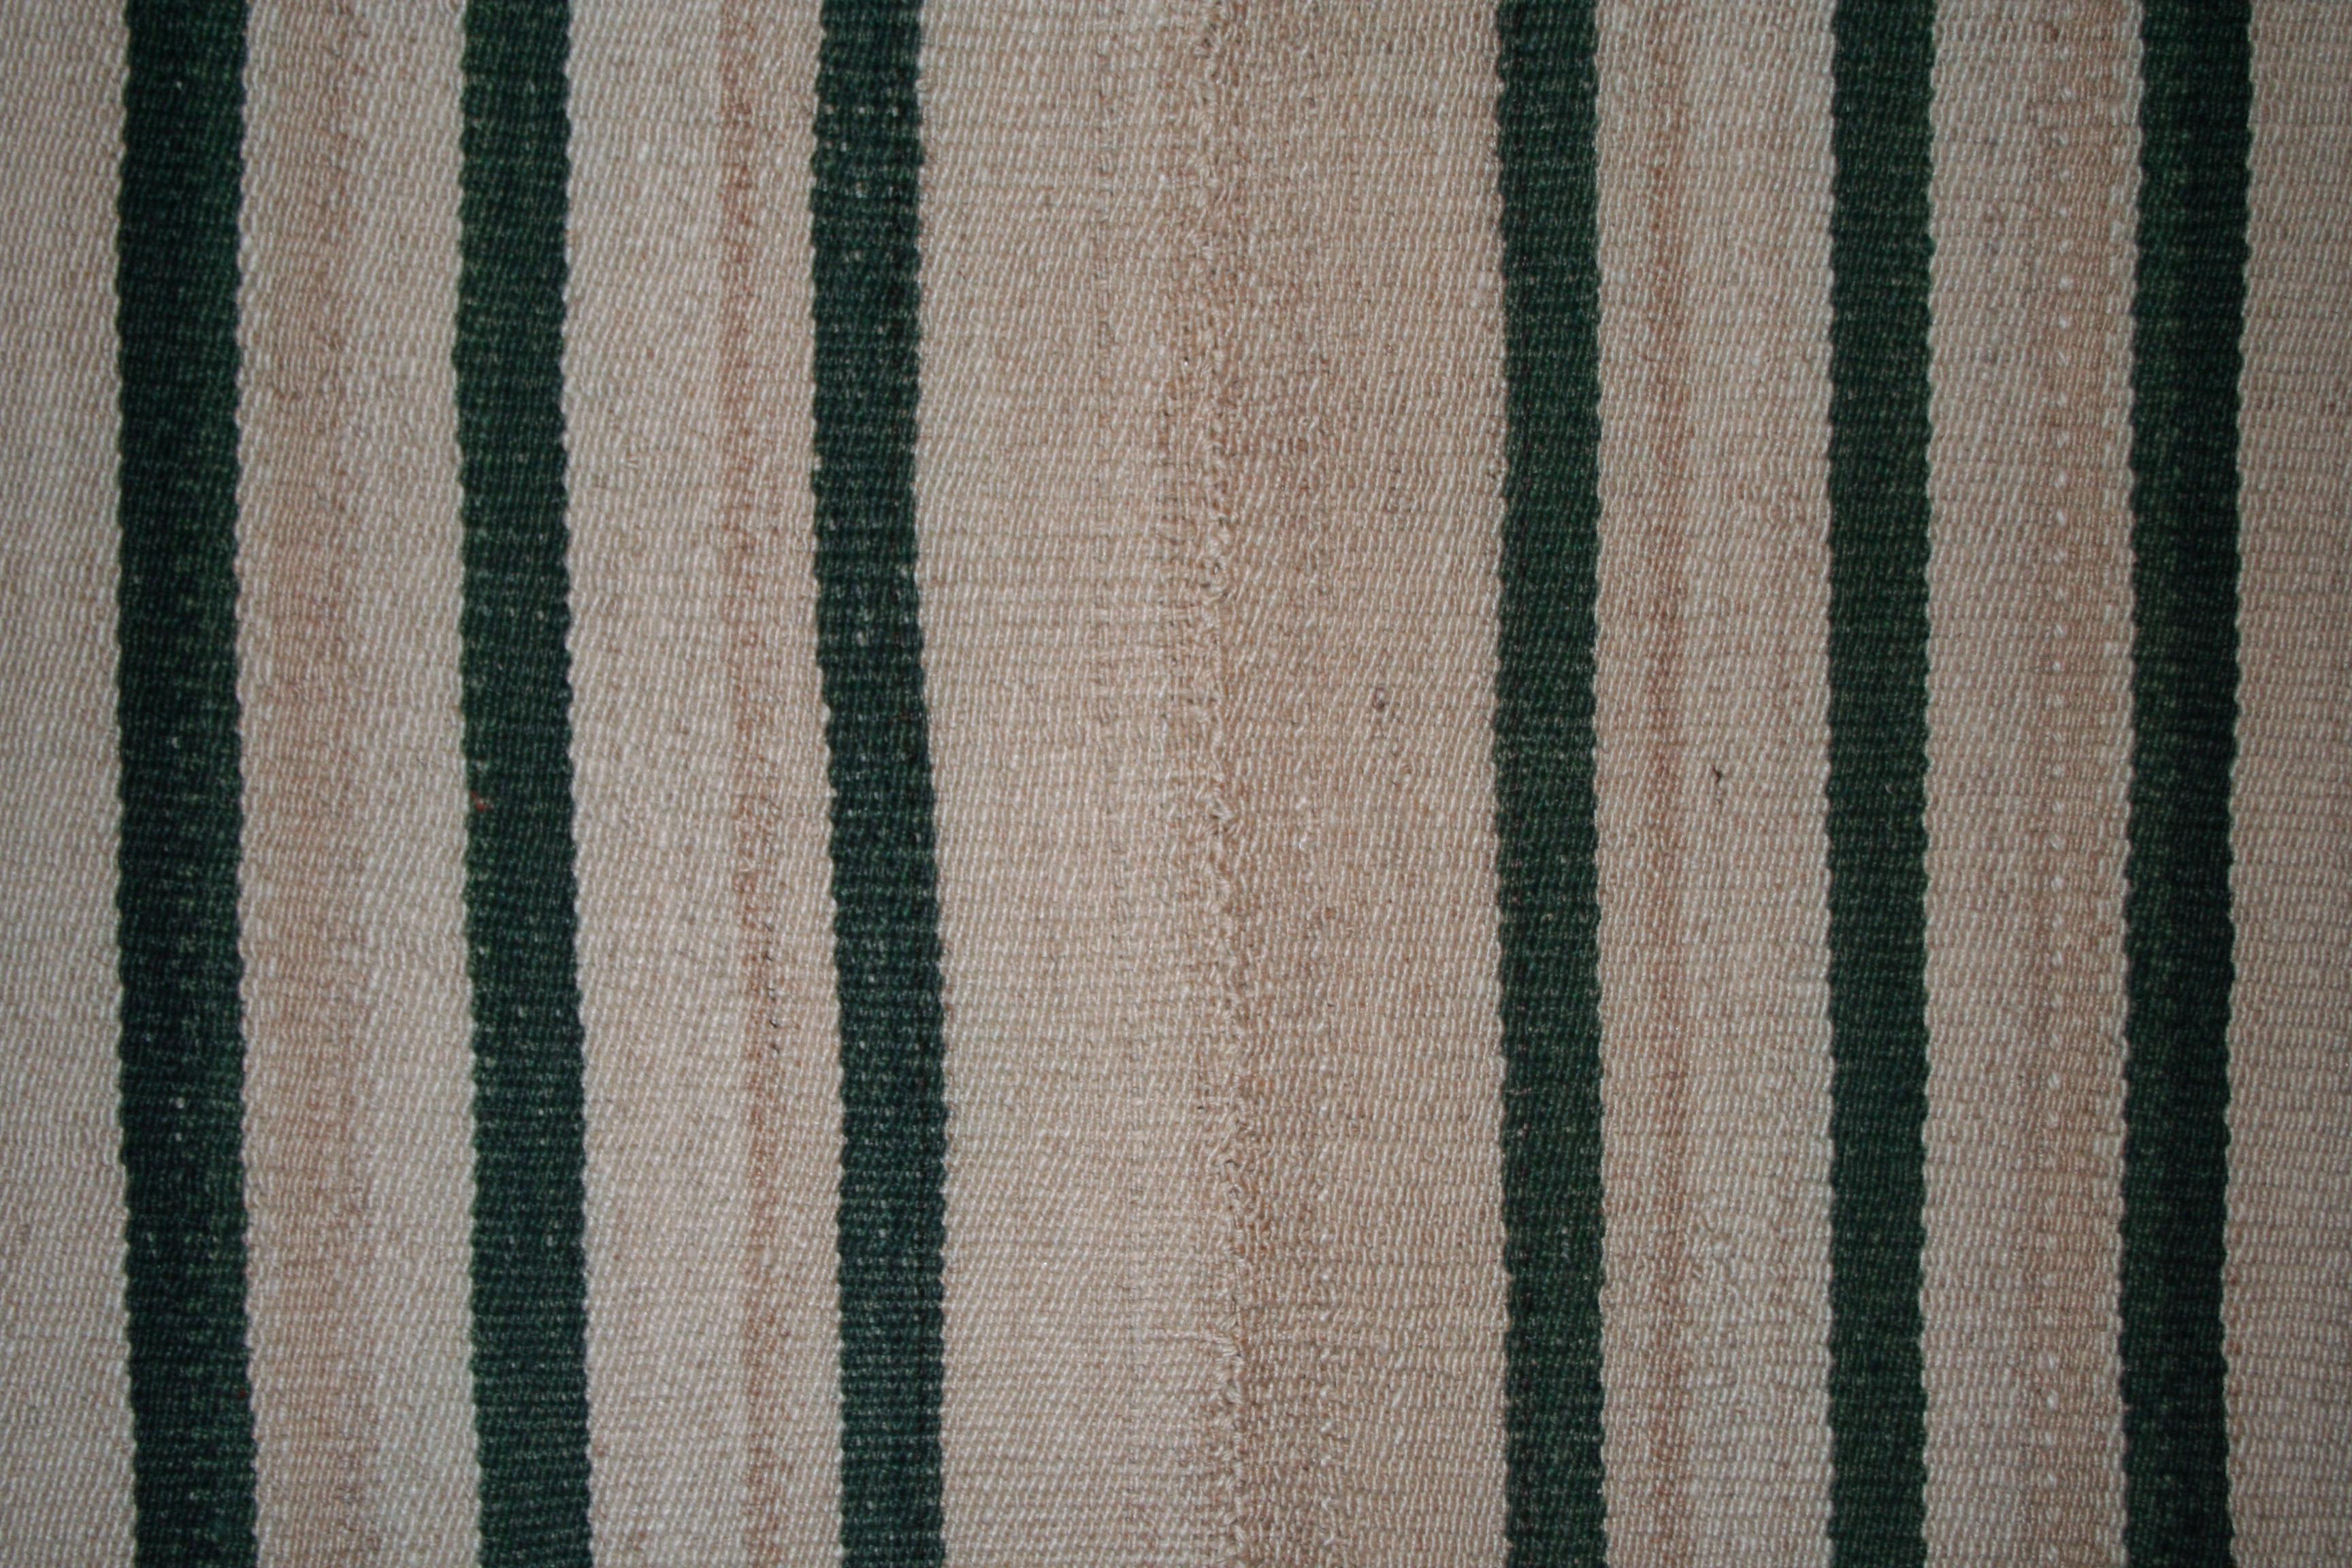 Hand-Woven Antique Minimalist Jajim Flat-Woven Rug with Vertical Ivory/Green Stripes For Sale